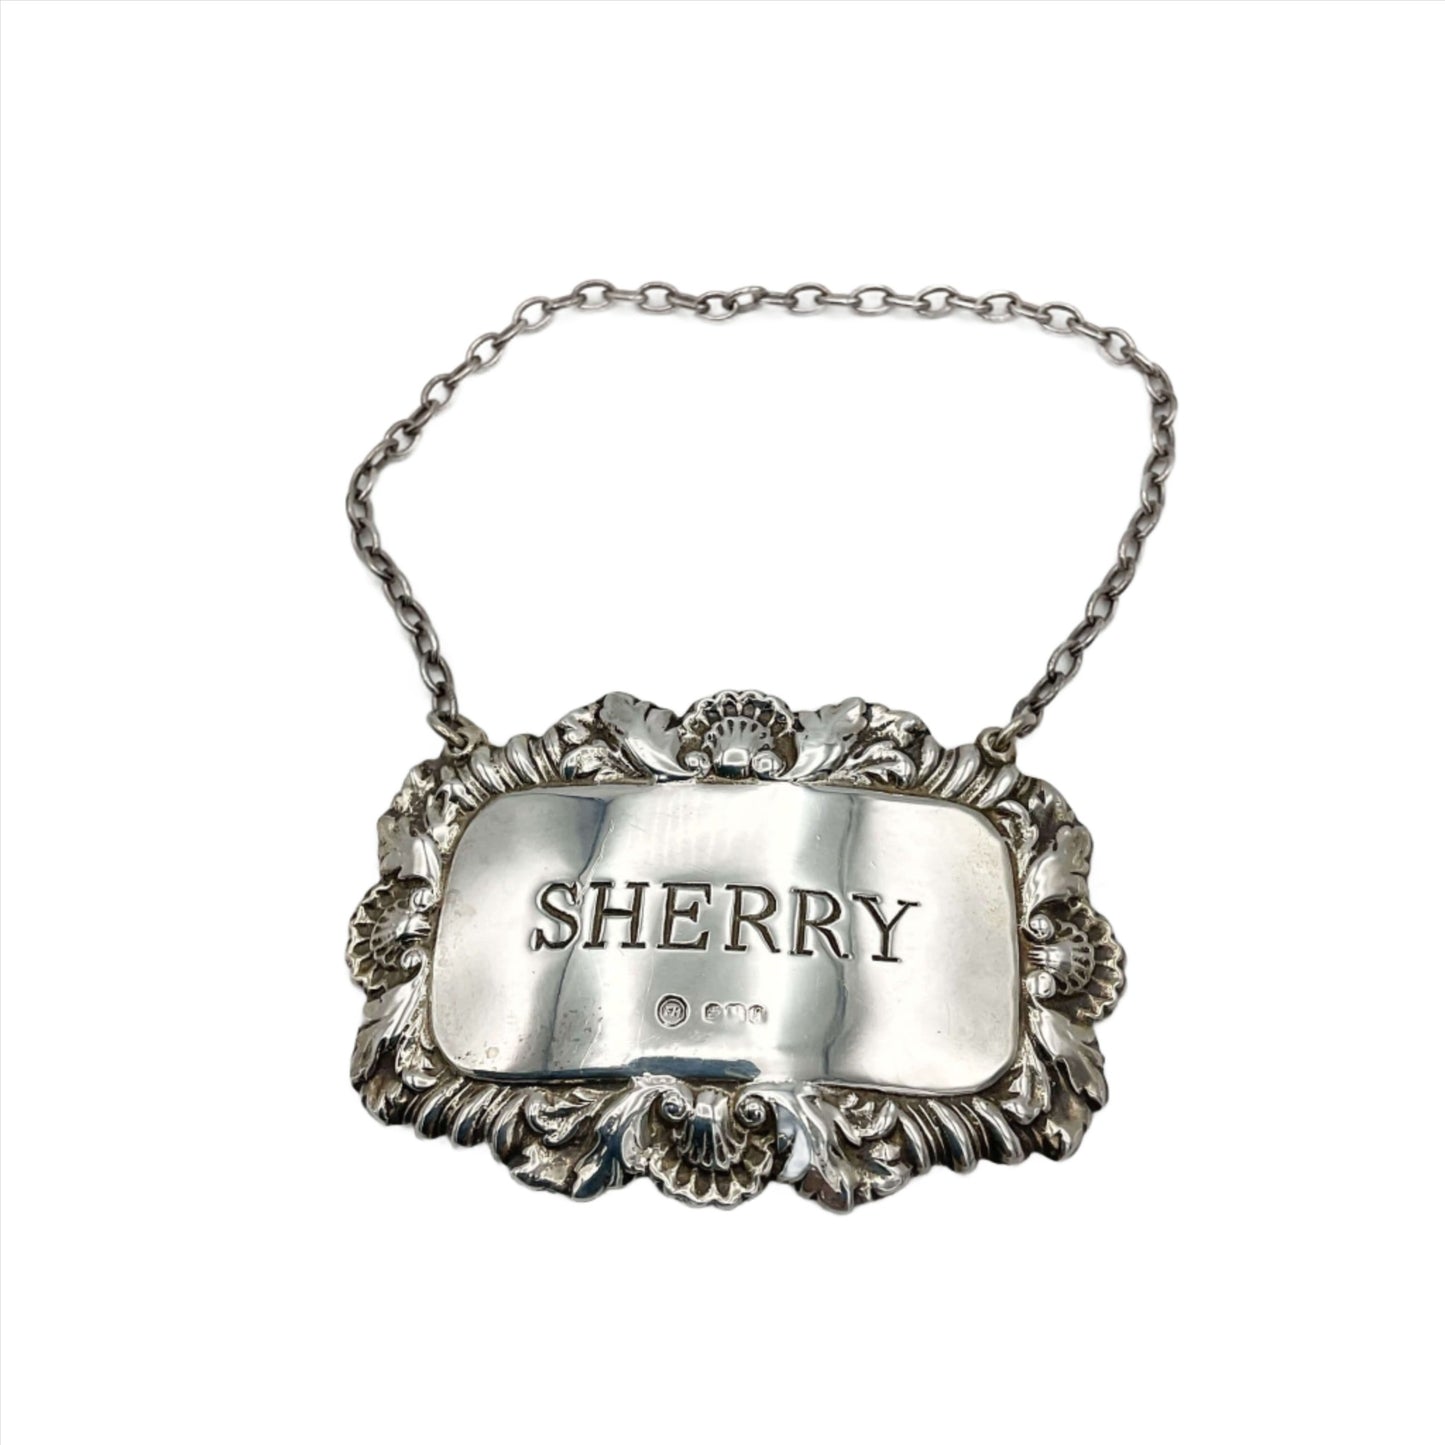 Ornate silver decanter label with Sherry engraved in the centre on a white background